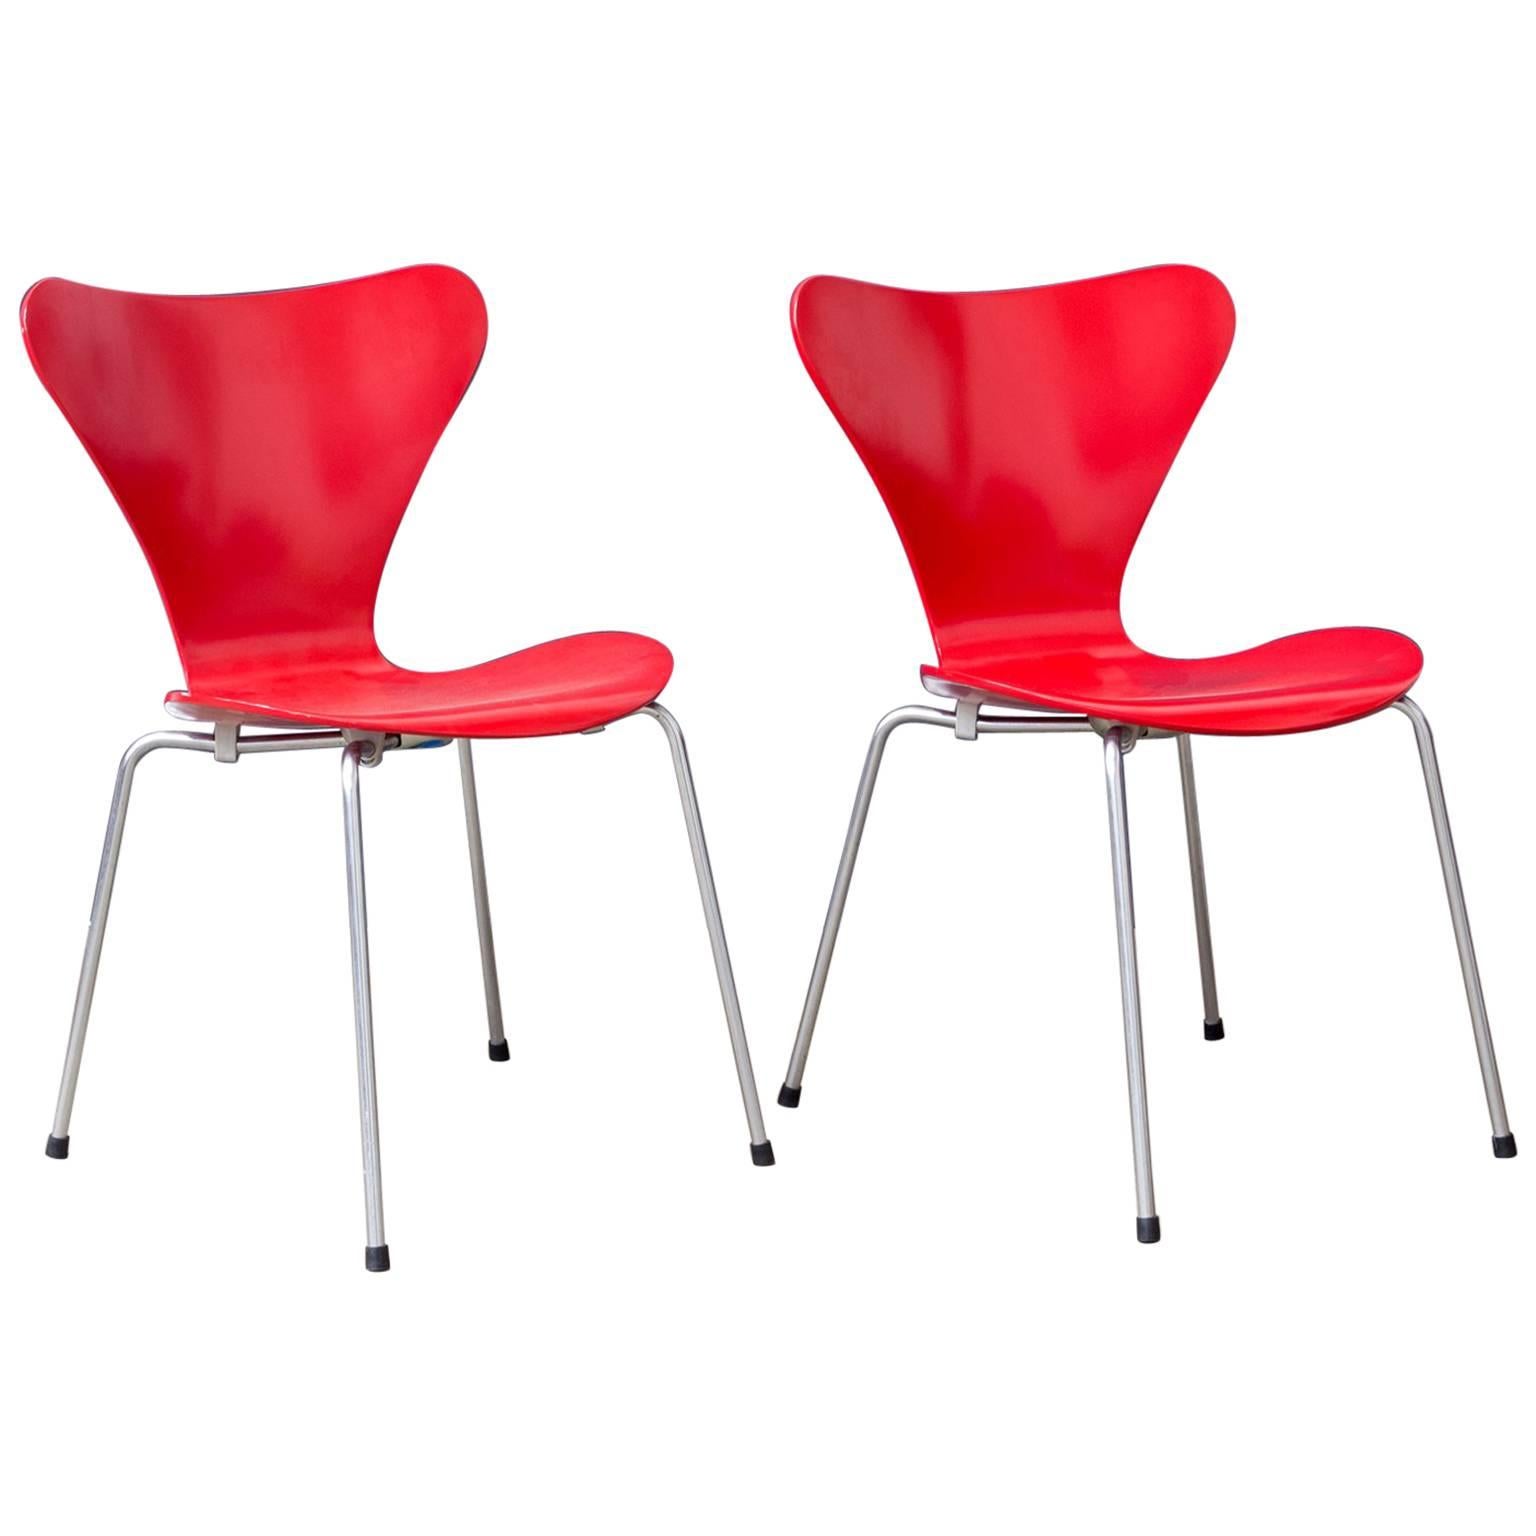 1955, Arne Jacobsen, Set of Two Early Vintage Red Painted 3107 Butterfly Chairs